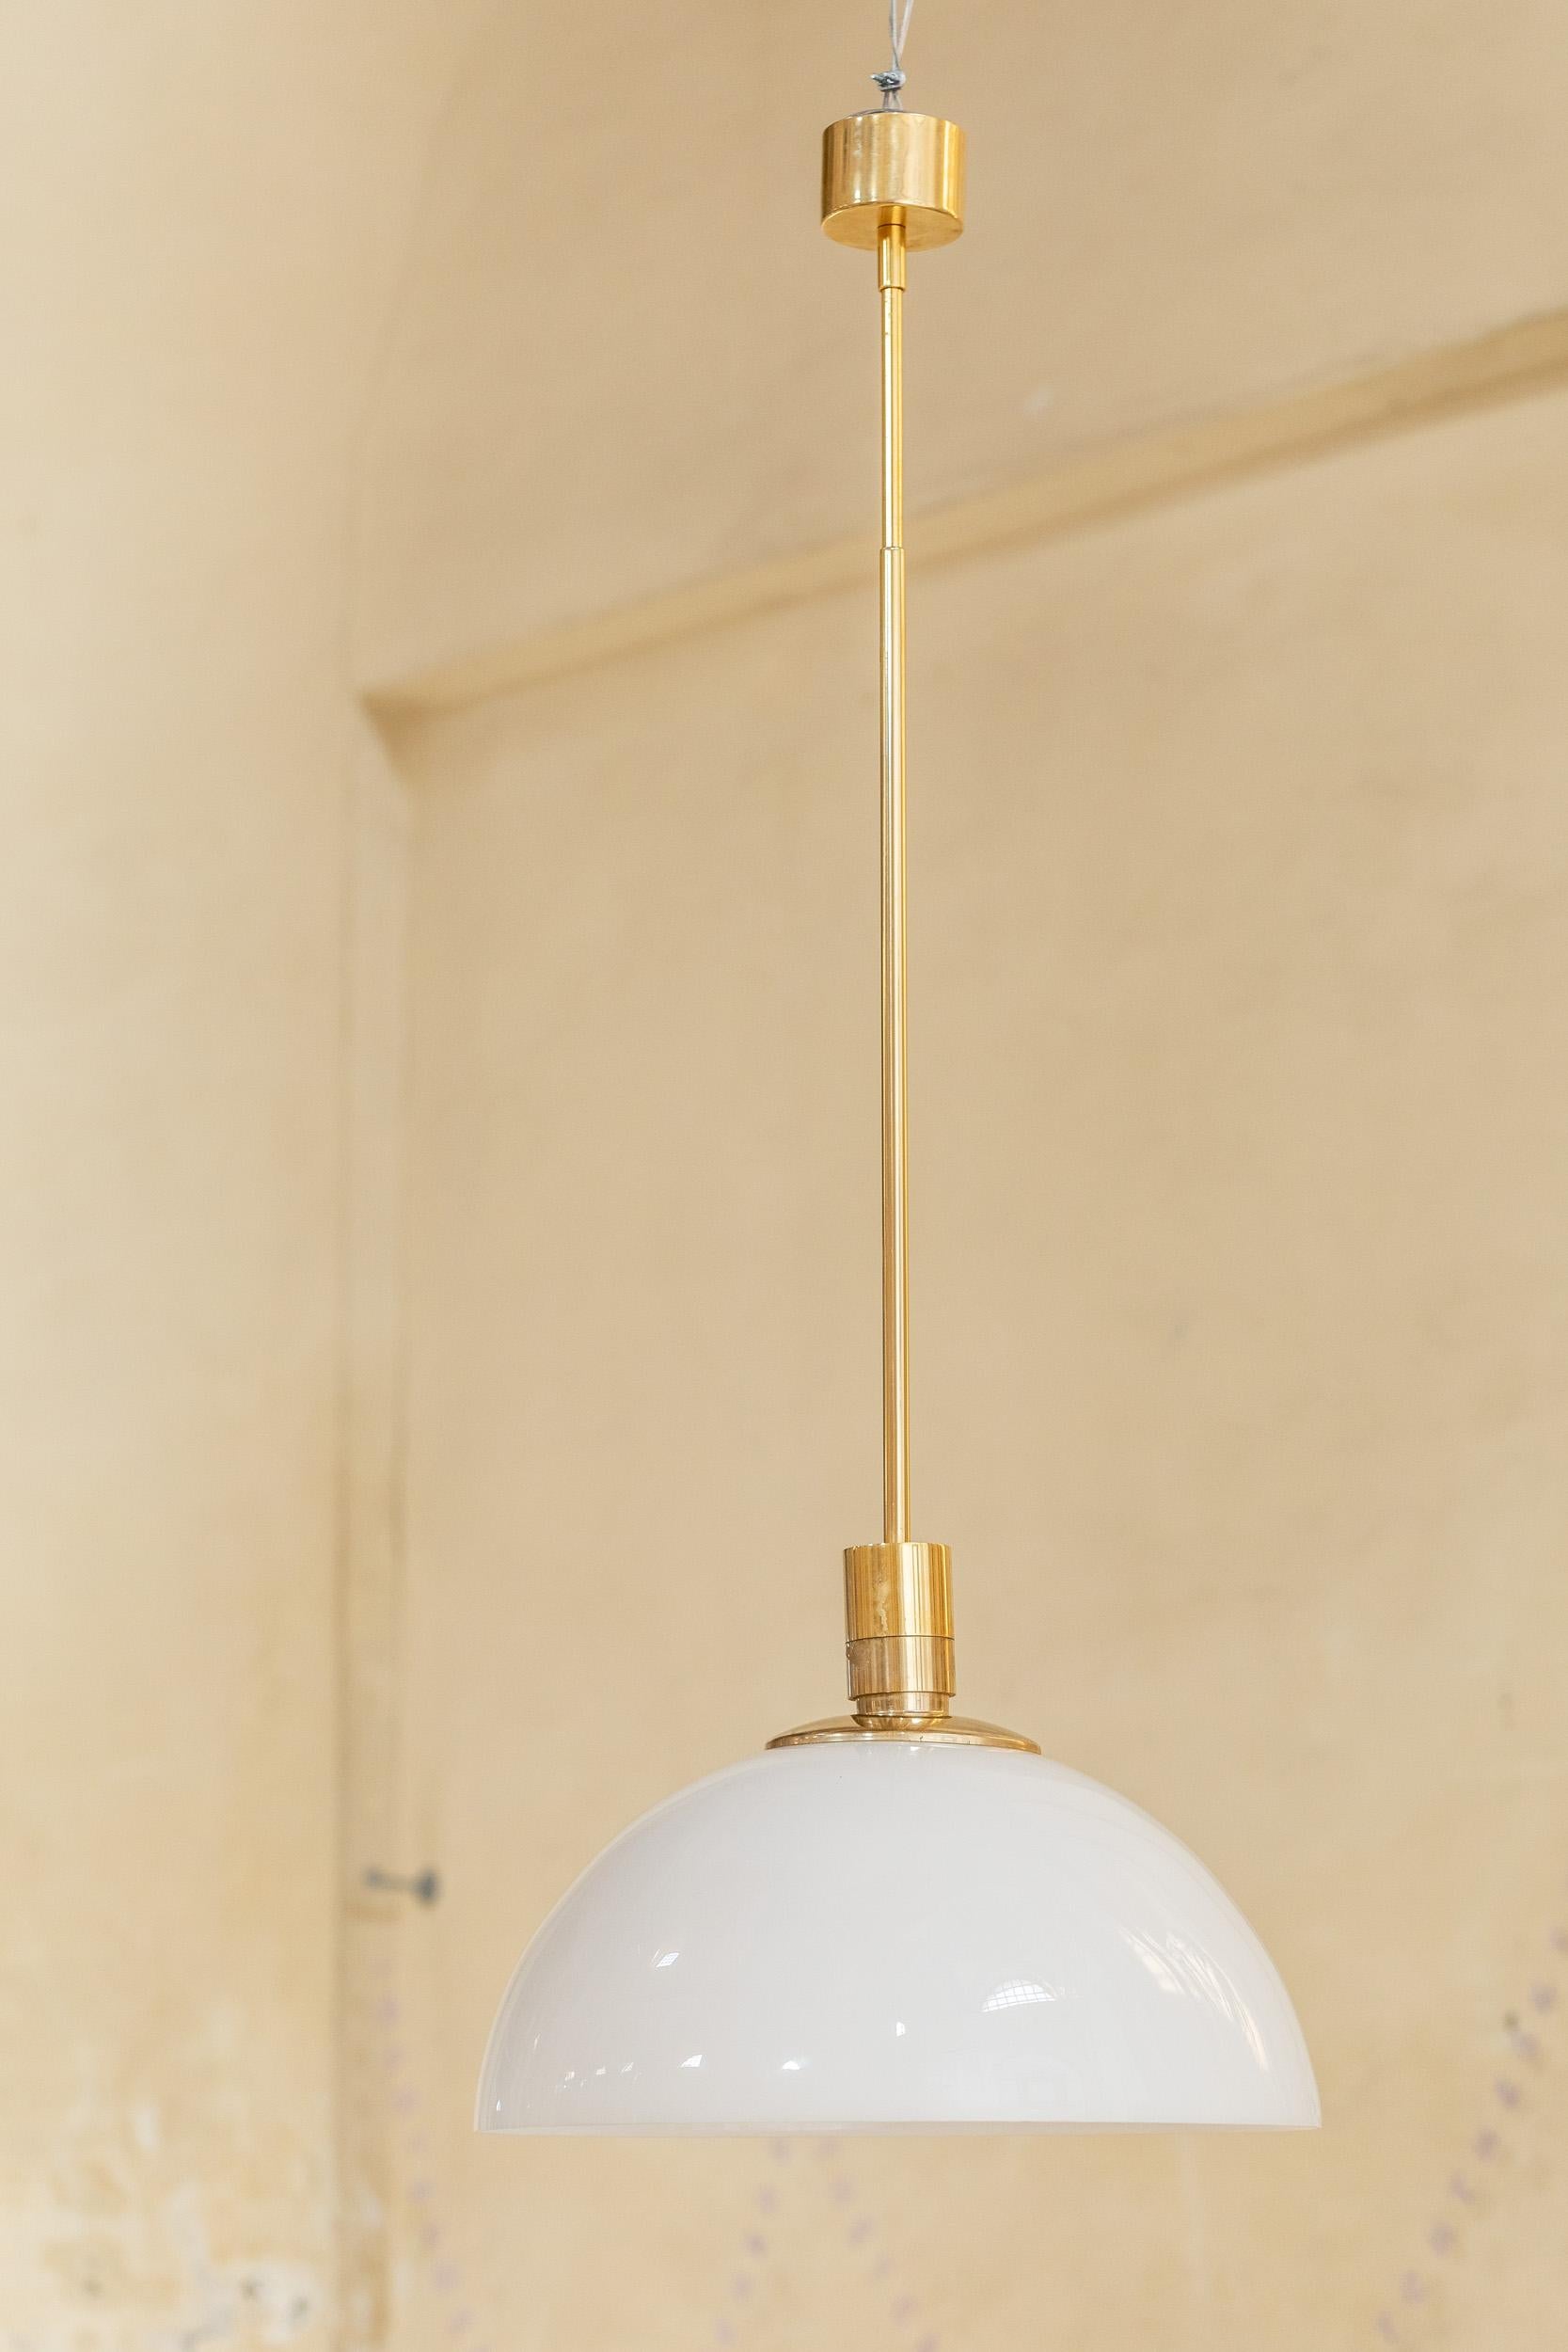 Midcentury Italian Pendant Light by Franco Albini for Sirrah, 1968-71 In Excellent Condition For Sale In Piacenza, Italy